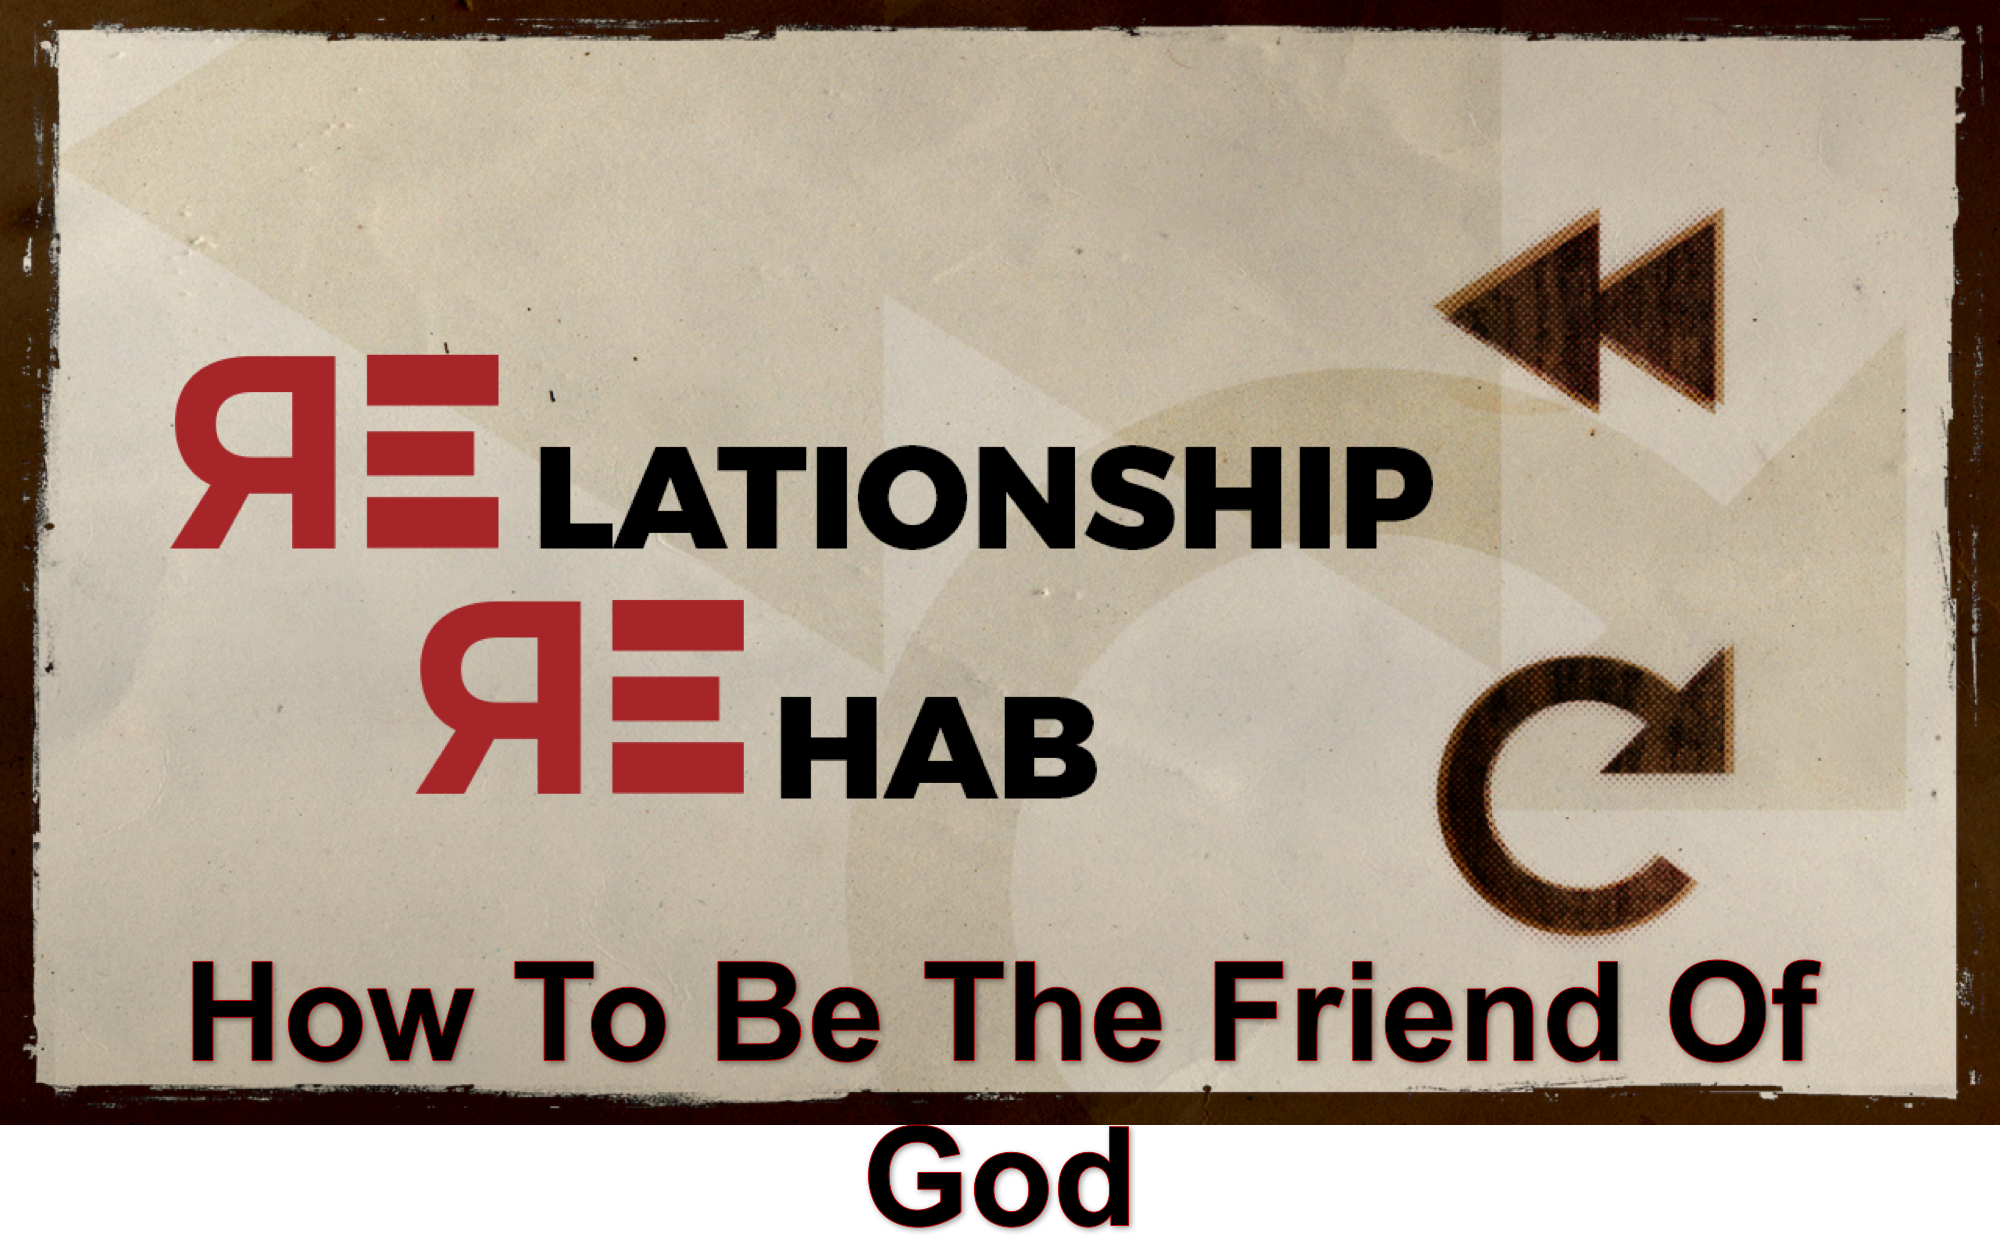 How to be the Friend of God